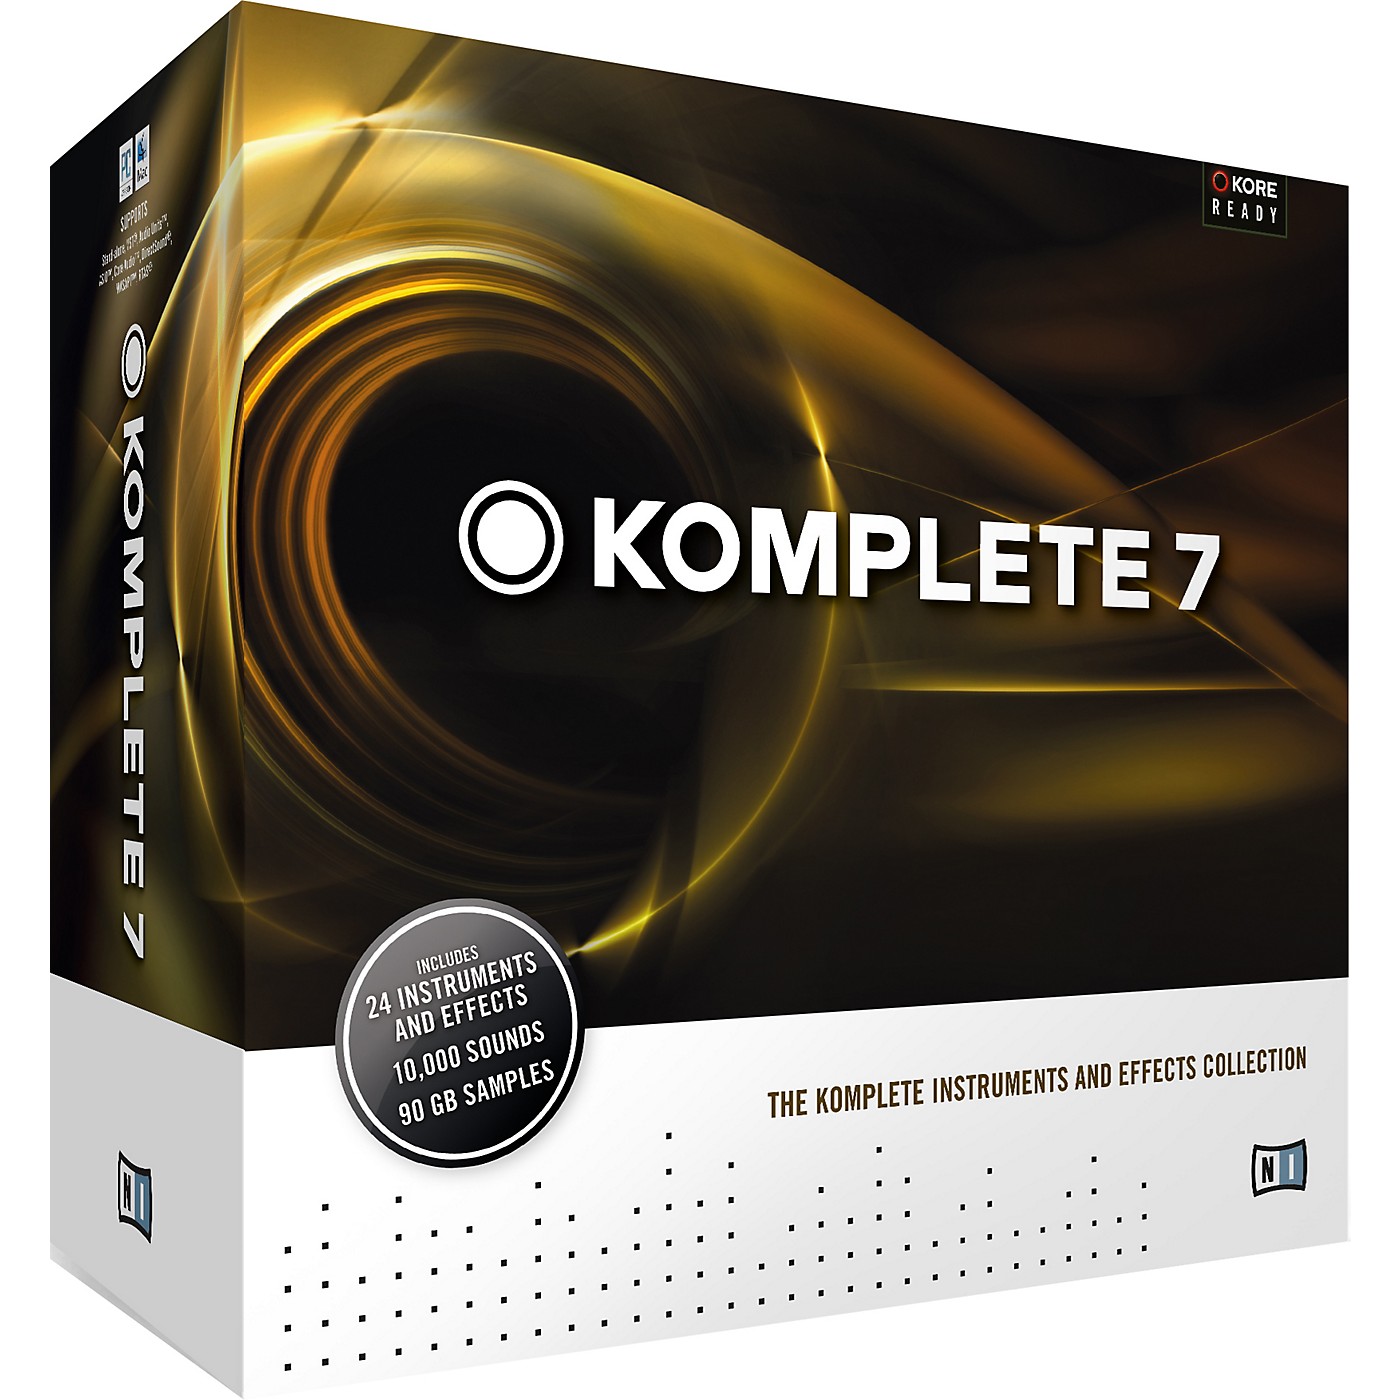 download the last version for android Native Instruments Kontakt 7.6.0